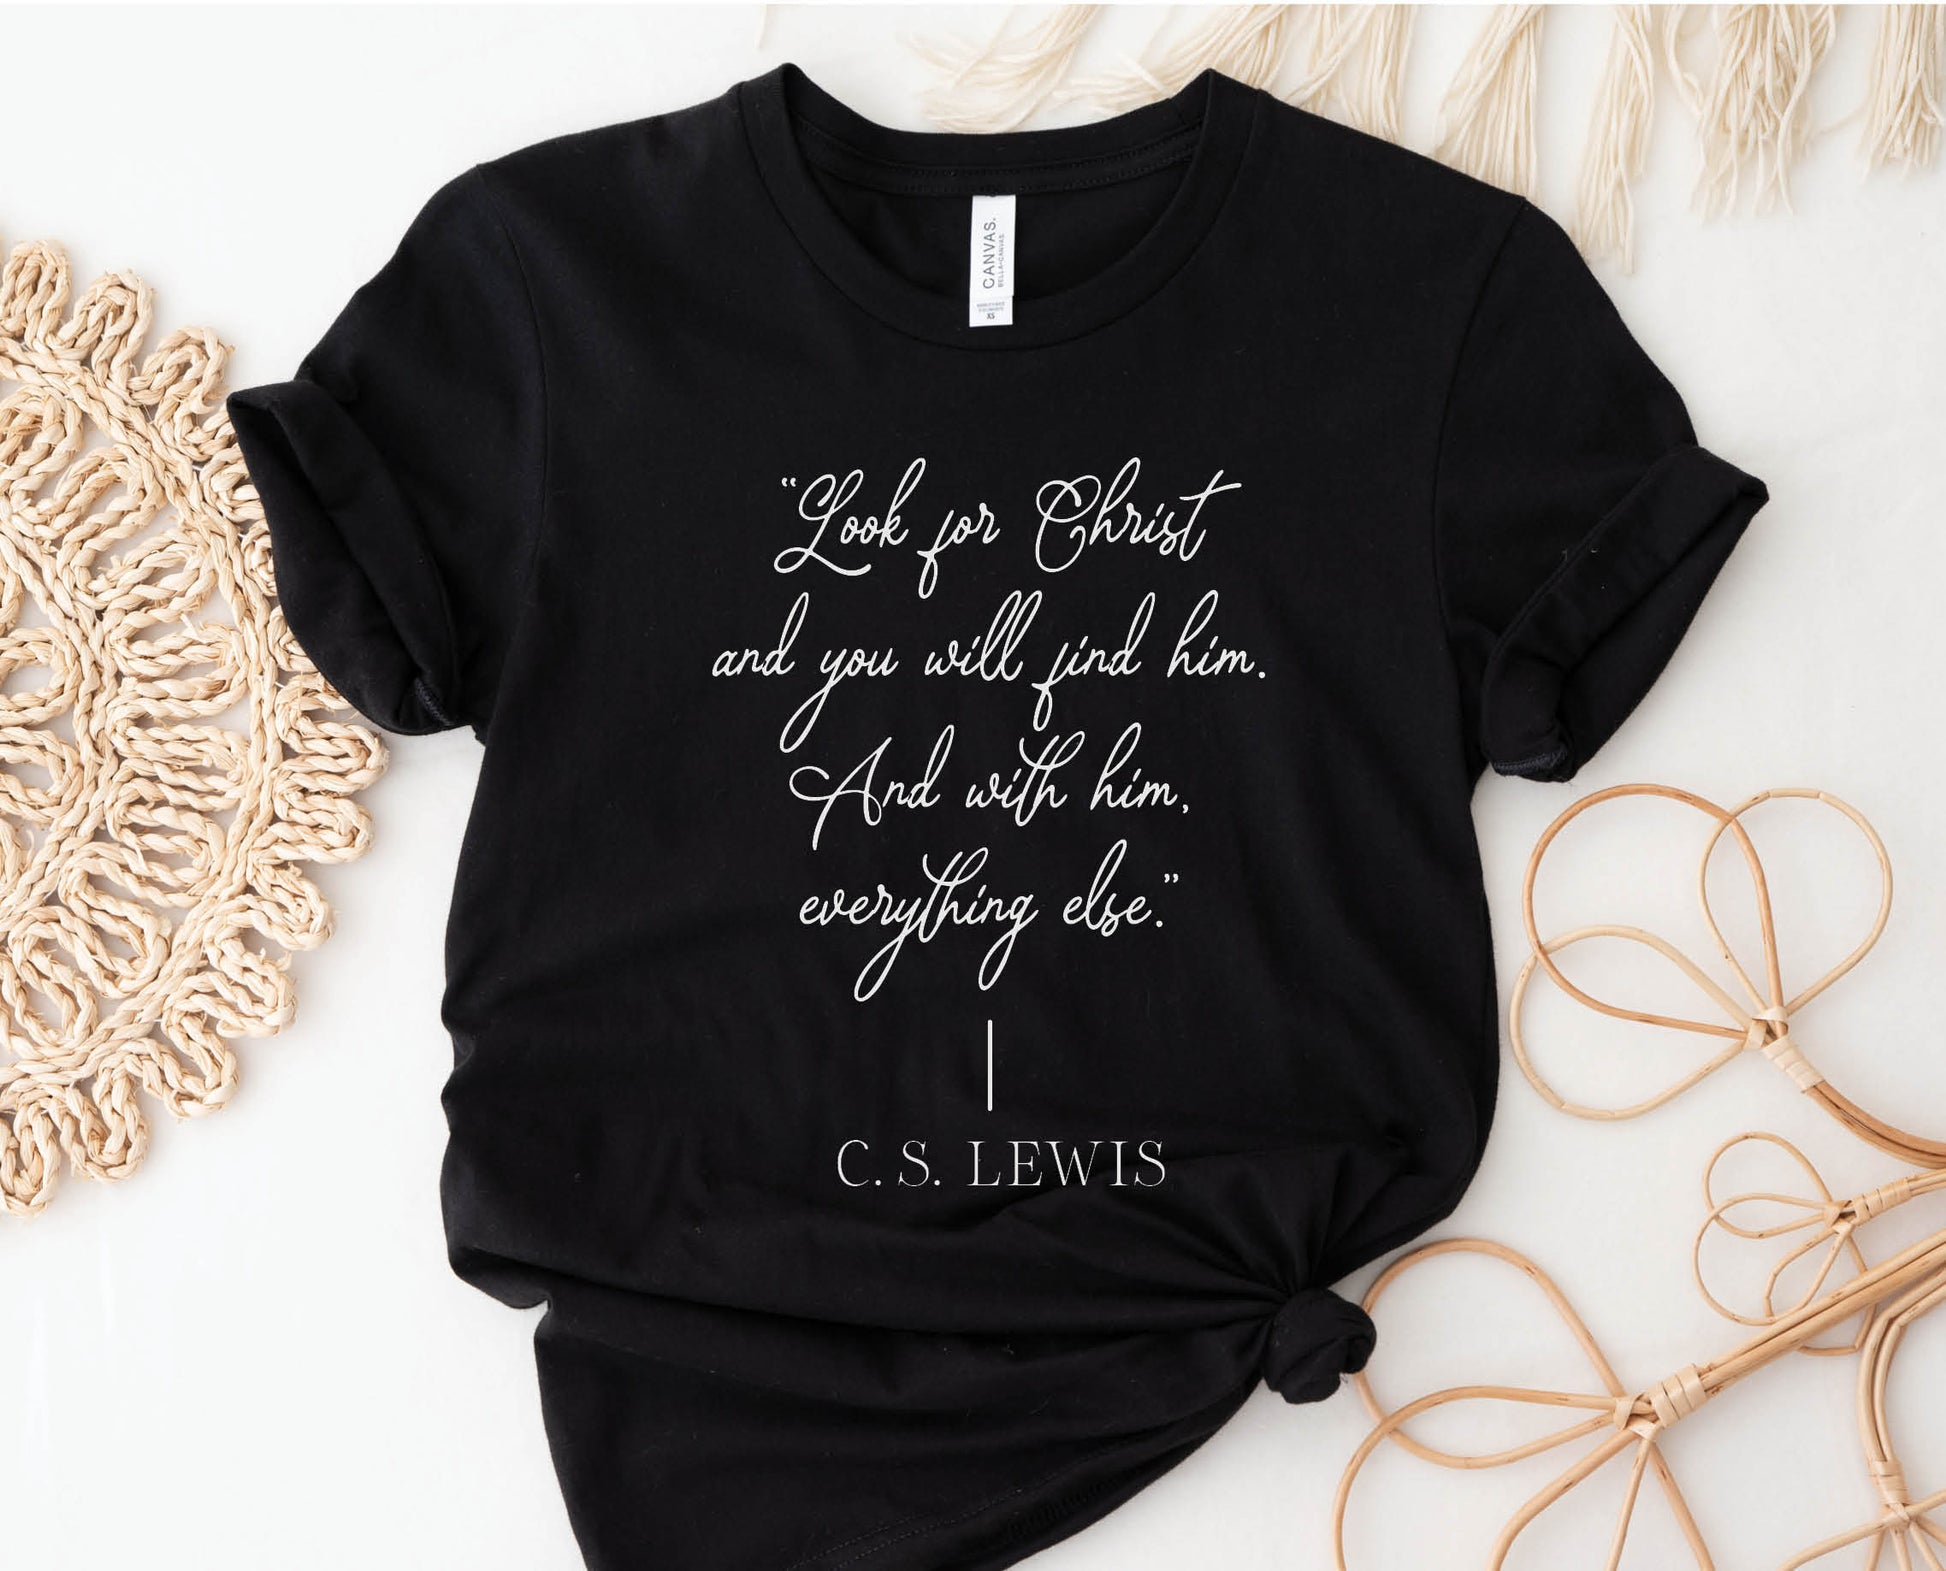 Soft quality black t-shirt with British writer Narnia author C.S. Lewis quote "Look for Christ and you will find him. And with him, everything else."  printed in white vintage script - Christian aesthetic unisex tee shirt design for women